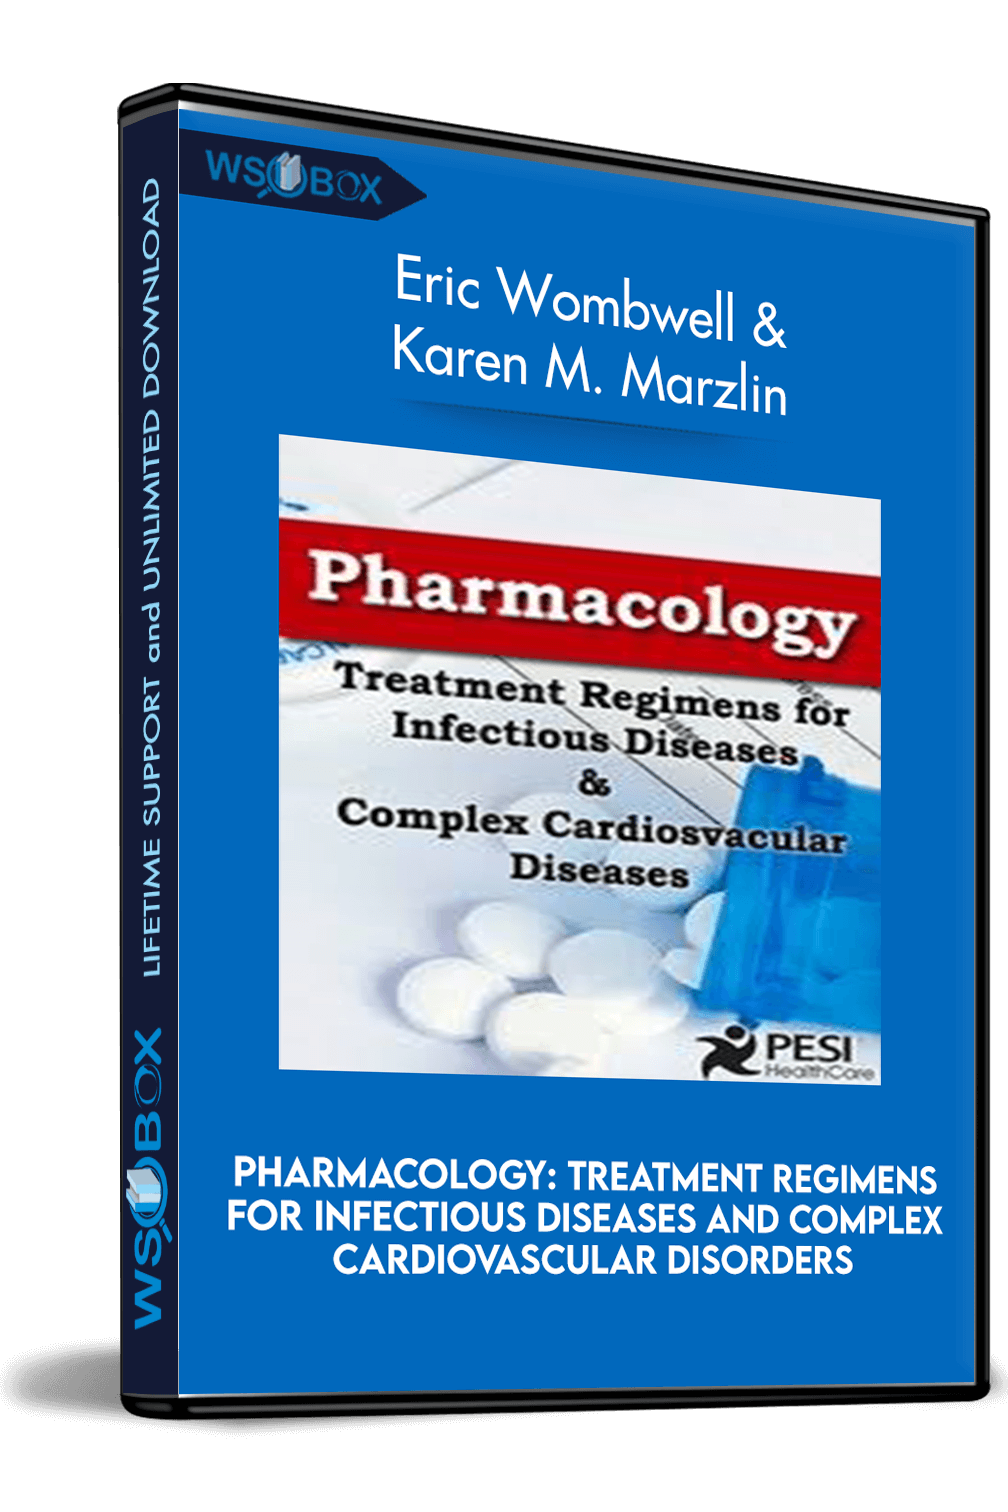 pharmacology-treatment-regimens-for-infectious-diseases-and-complex-cardiovascular-disorders-eric-wombwell-karen-m-marzlin